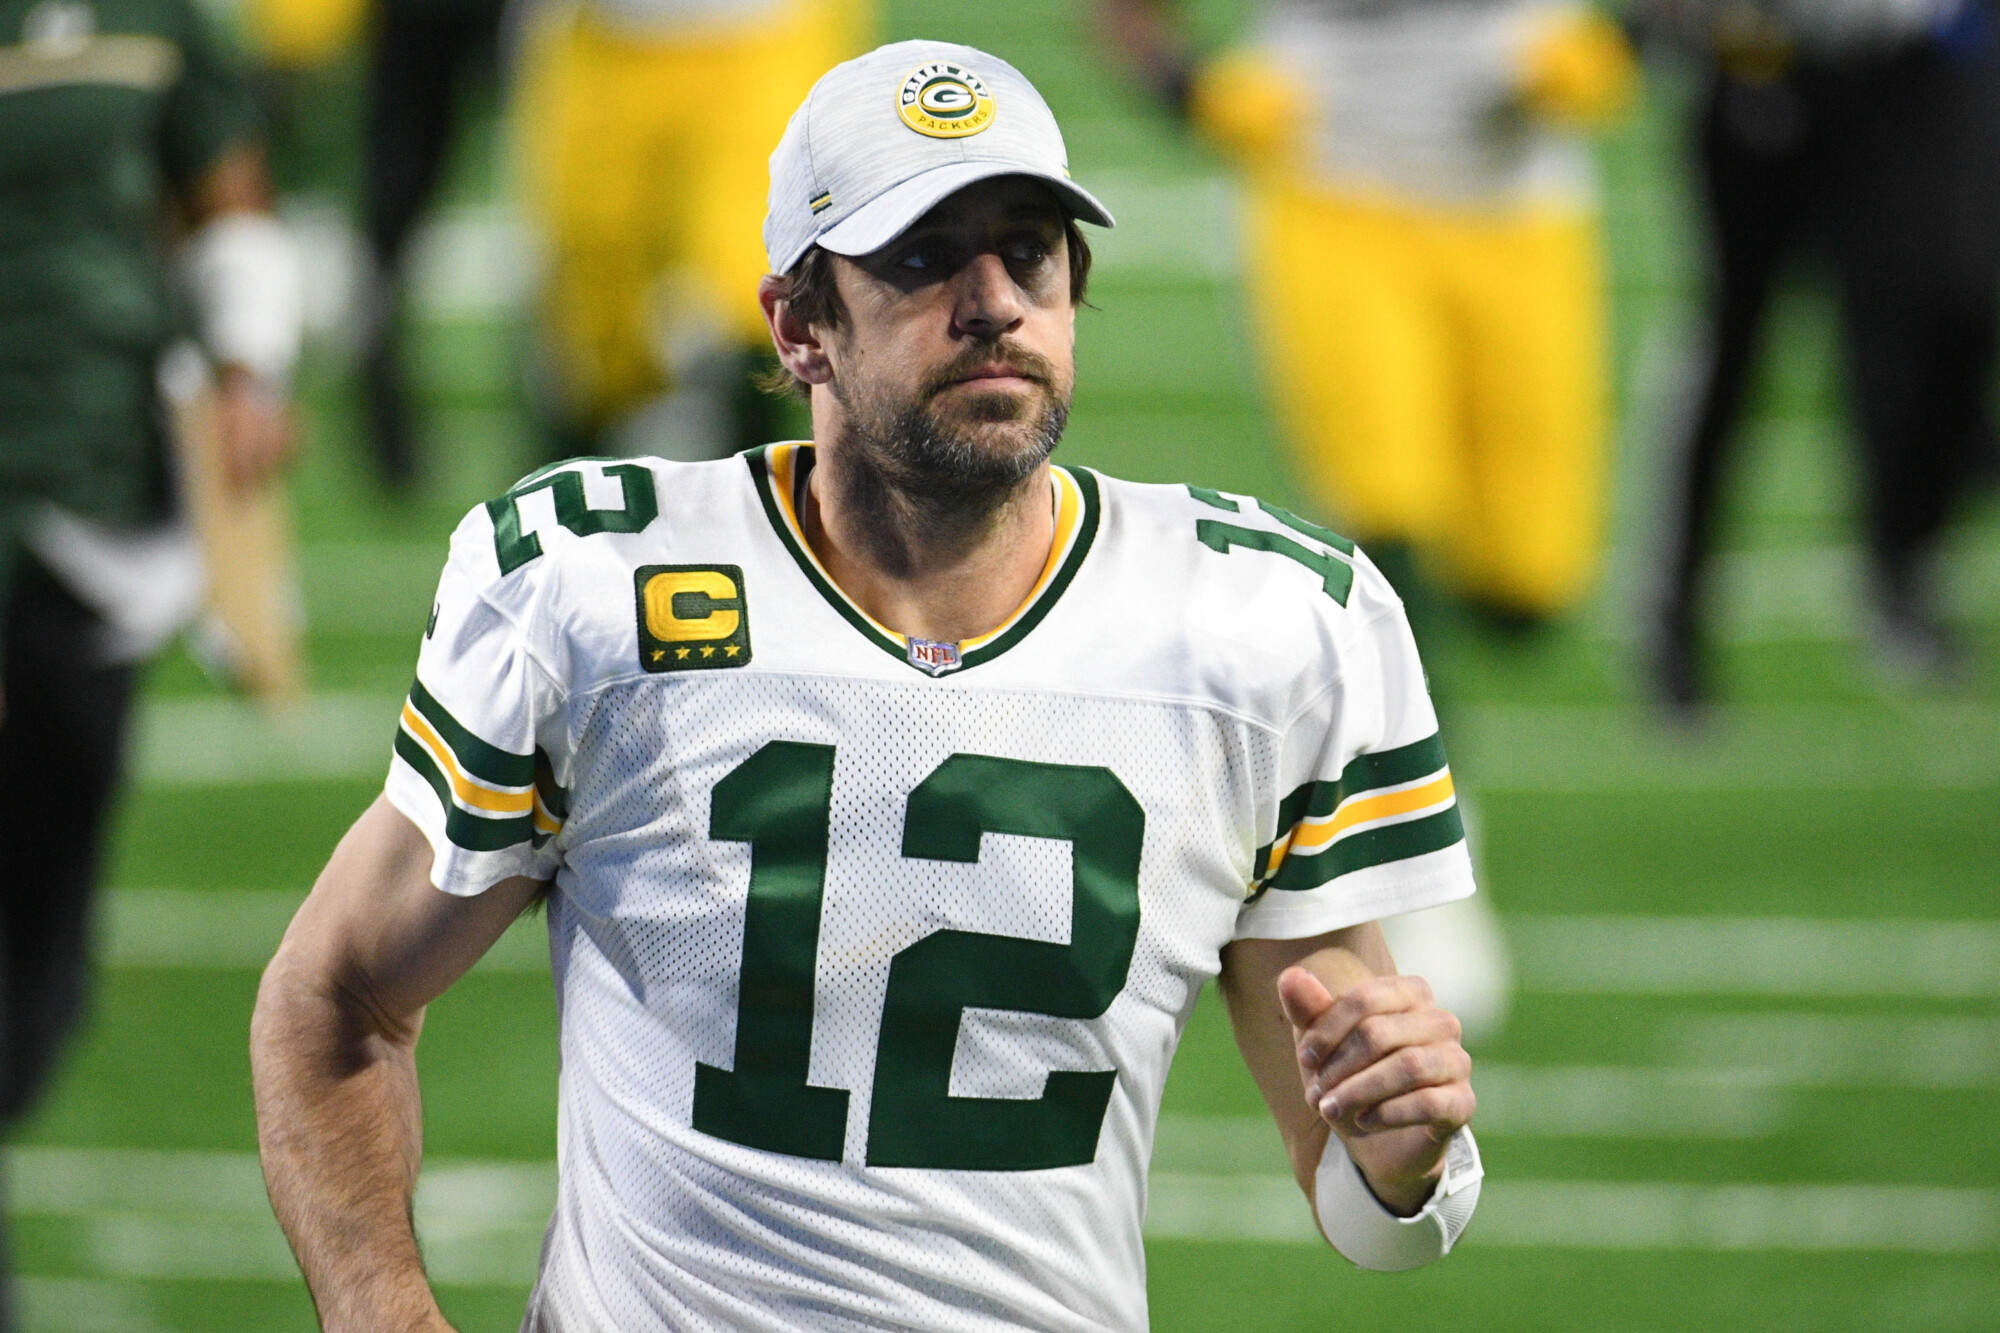 NFL Fines Aaron Rodgers, Green Bay Packers for Breaching COVID-19 Protocols